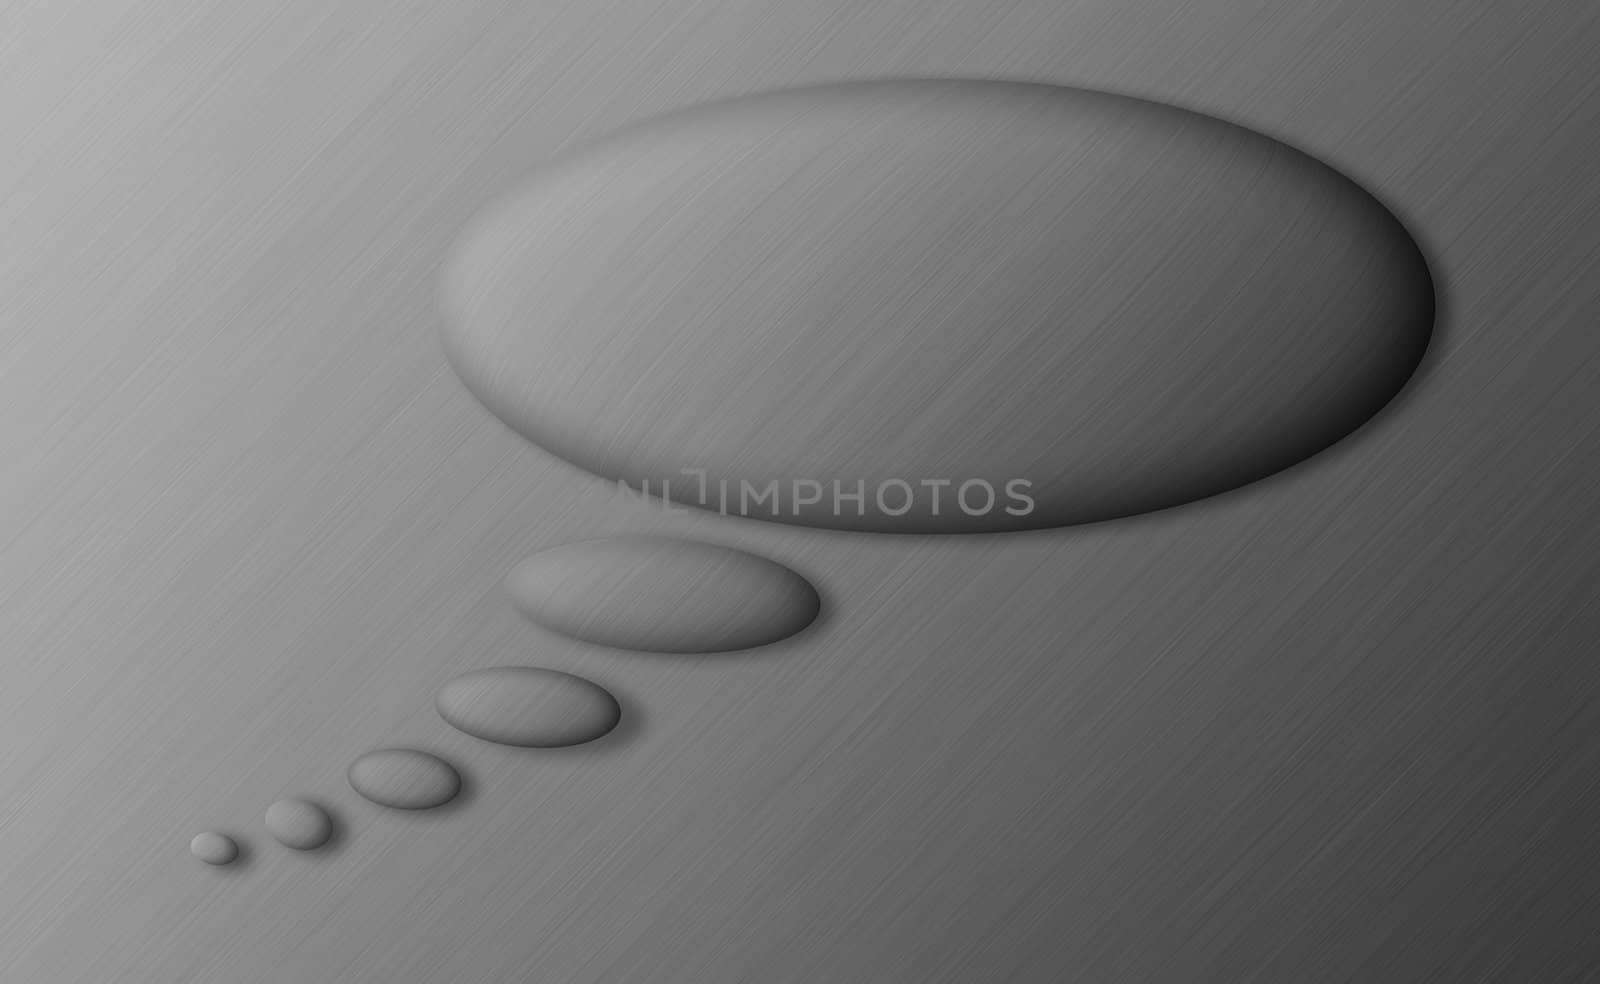 Metalic abstract background with water drops by mozzyb